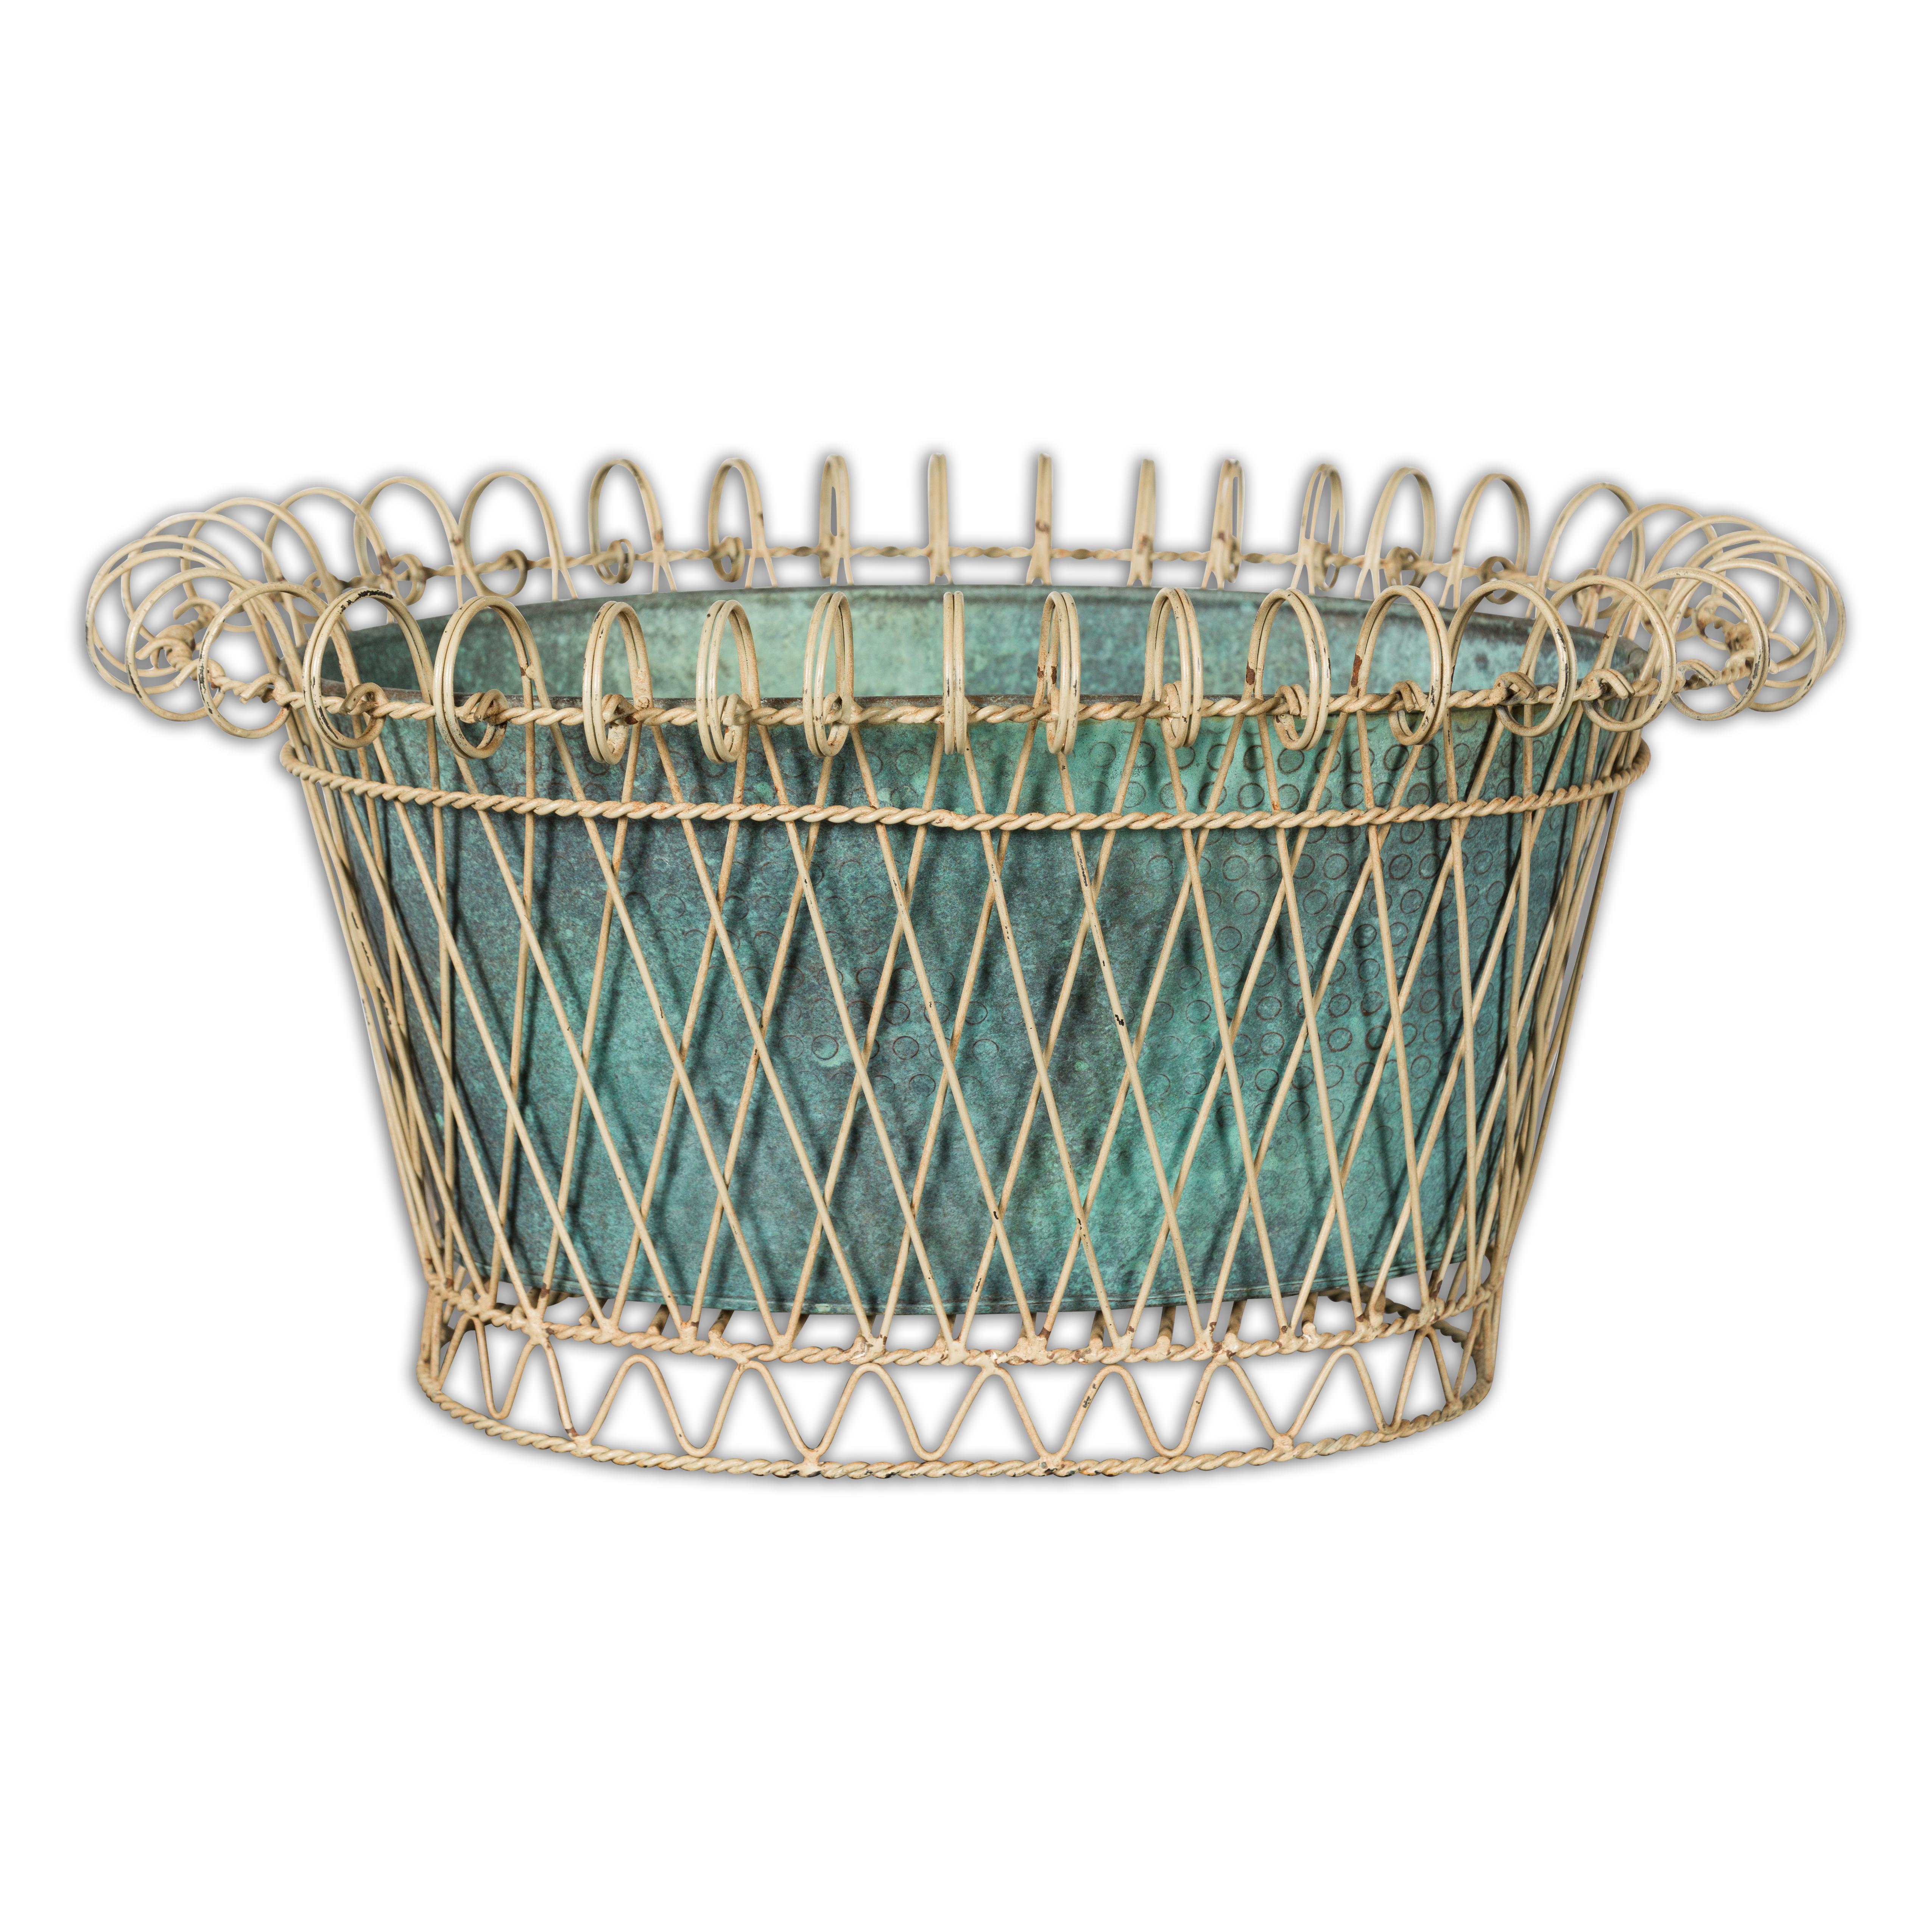 A rustic French oval shaped cachepot from the midcentury period with white painted metal frame surrounding a blue green liner adorned with hammered décor. Emanating rustic charm and midcentury elegance, this French oval-shaped cachepot is a timeless